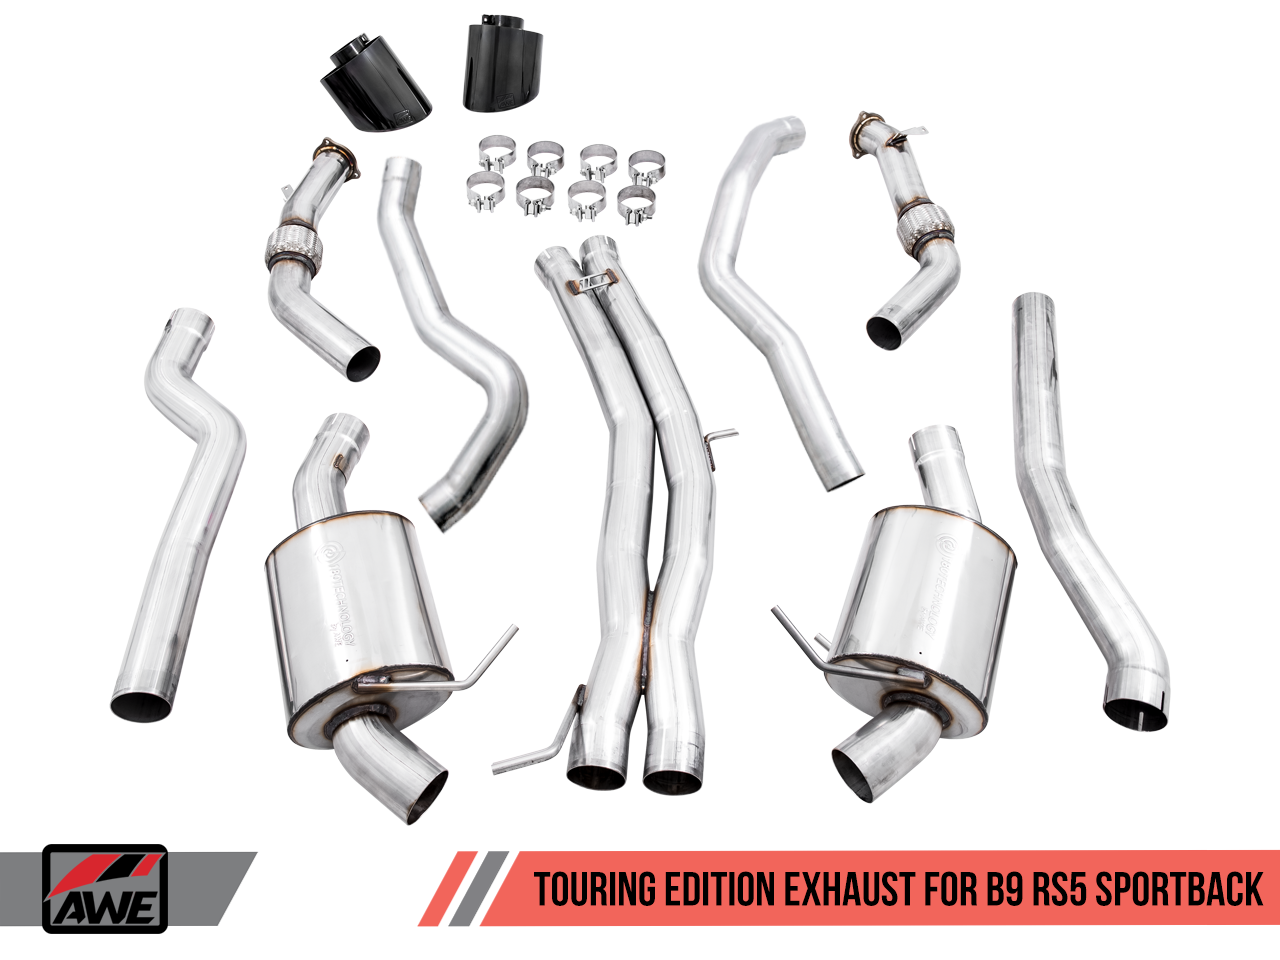 AWE Touring Edition Exhaust for Audi B9 RS 5 Sportback - Non-Resonated - Diamond Black RS-style Tips - Motorsports LA